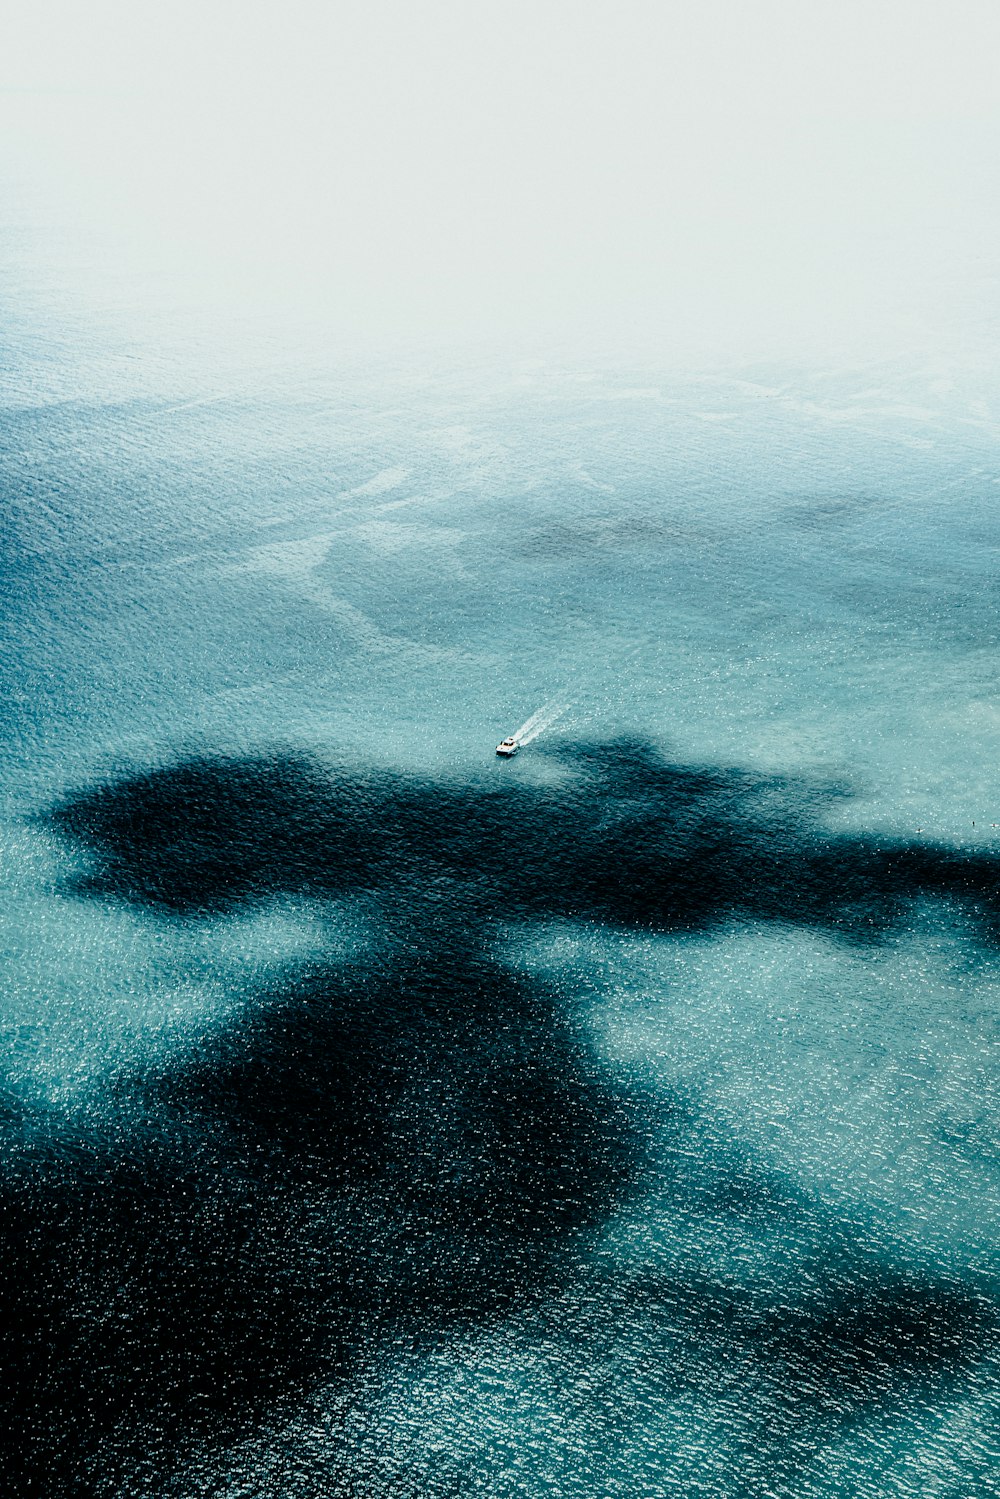 the shadow of a boat on the water